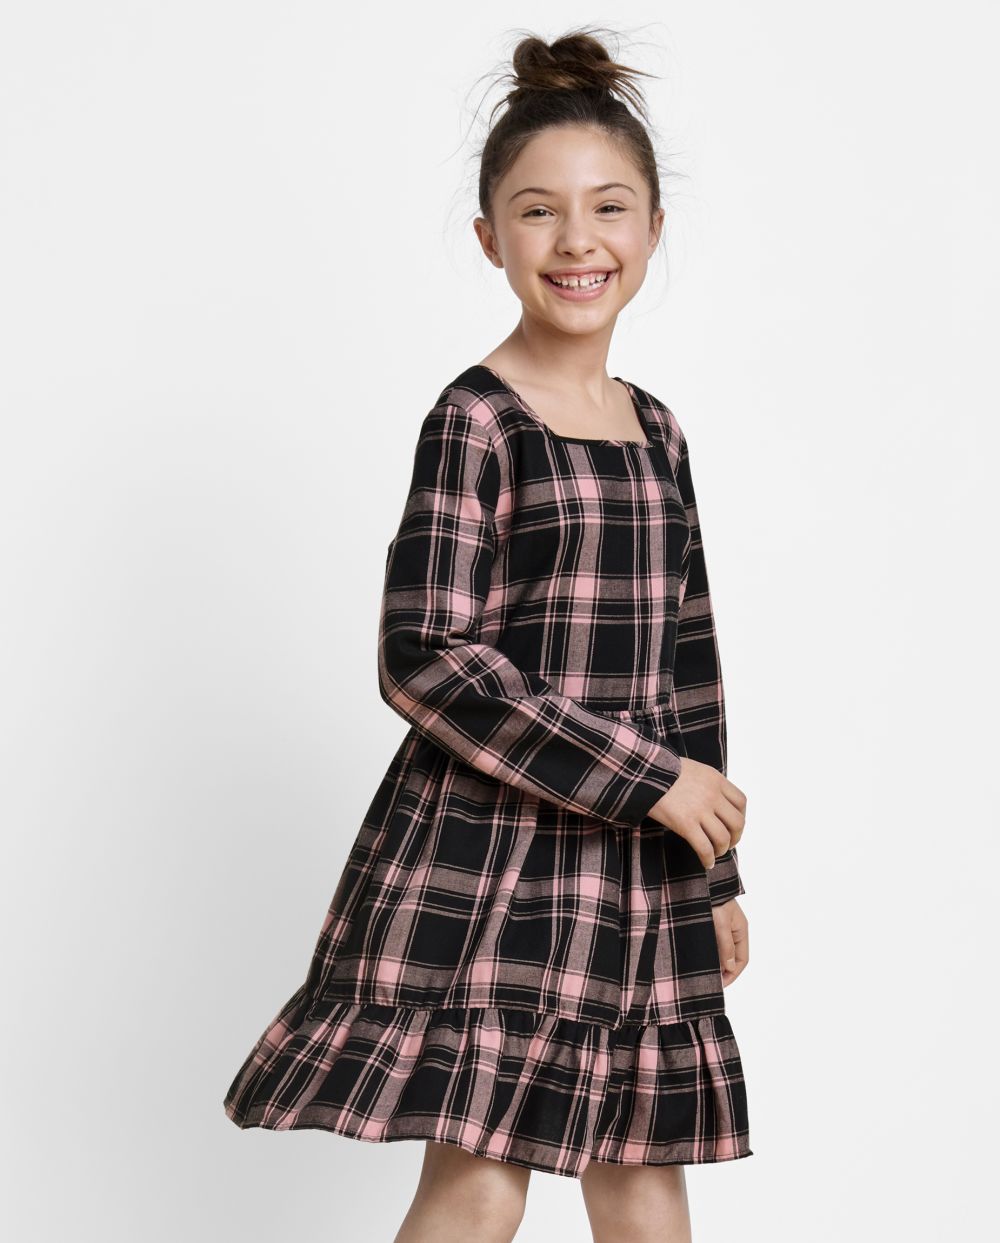 Girls Long Sleeves Plaid Print Square Neck Above the Knee Tiered Dress